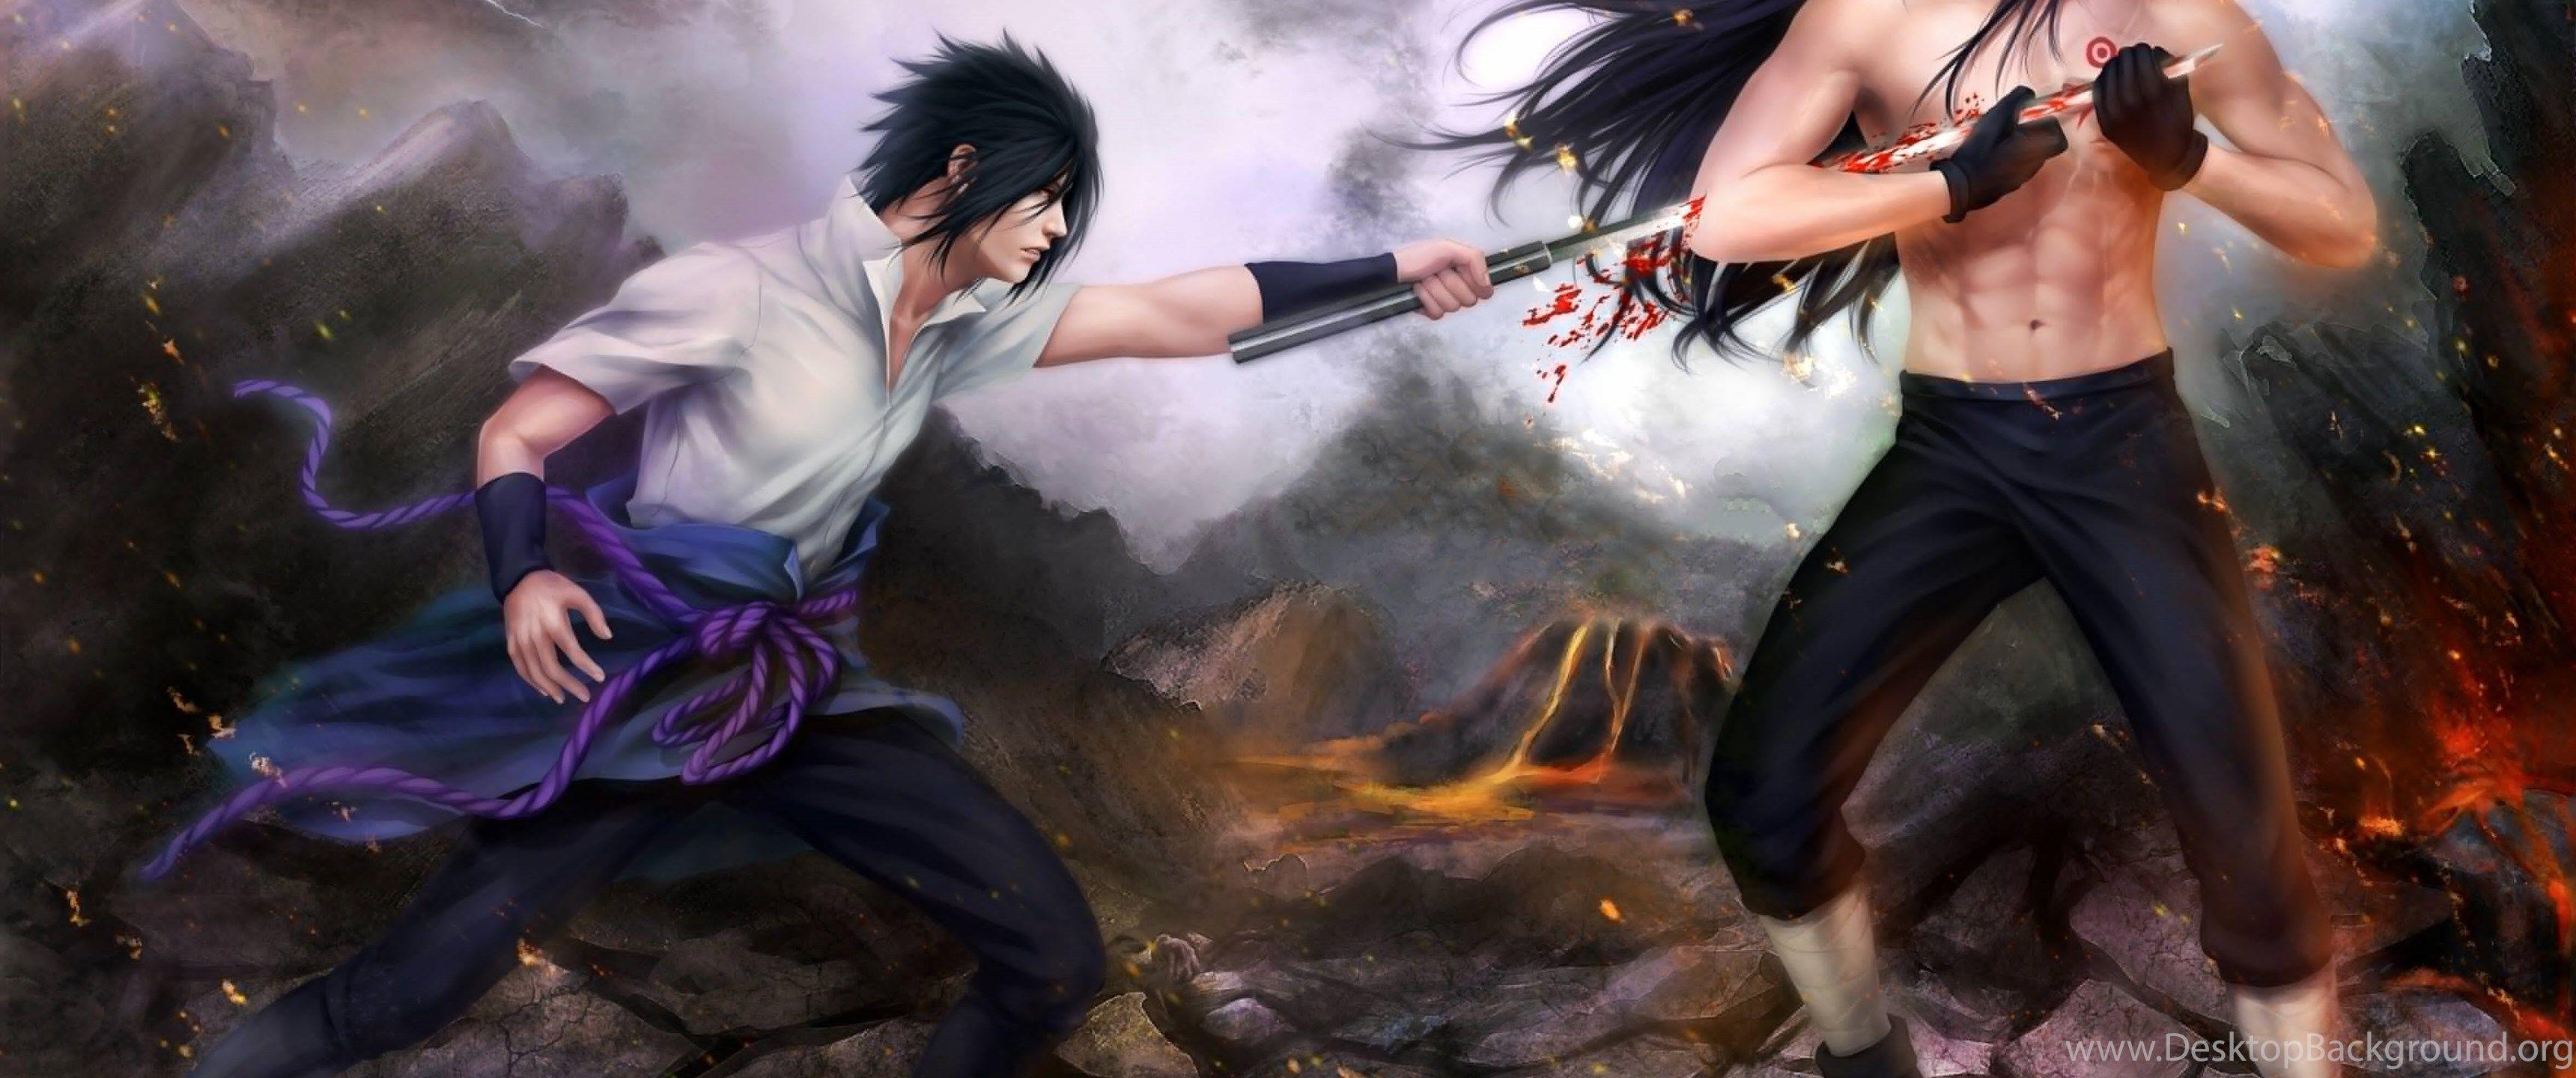 Naruto Ultra Wide Wallpapers - Top Free Naruto Ultra Wide ...